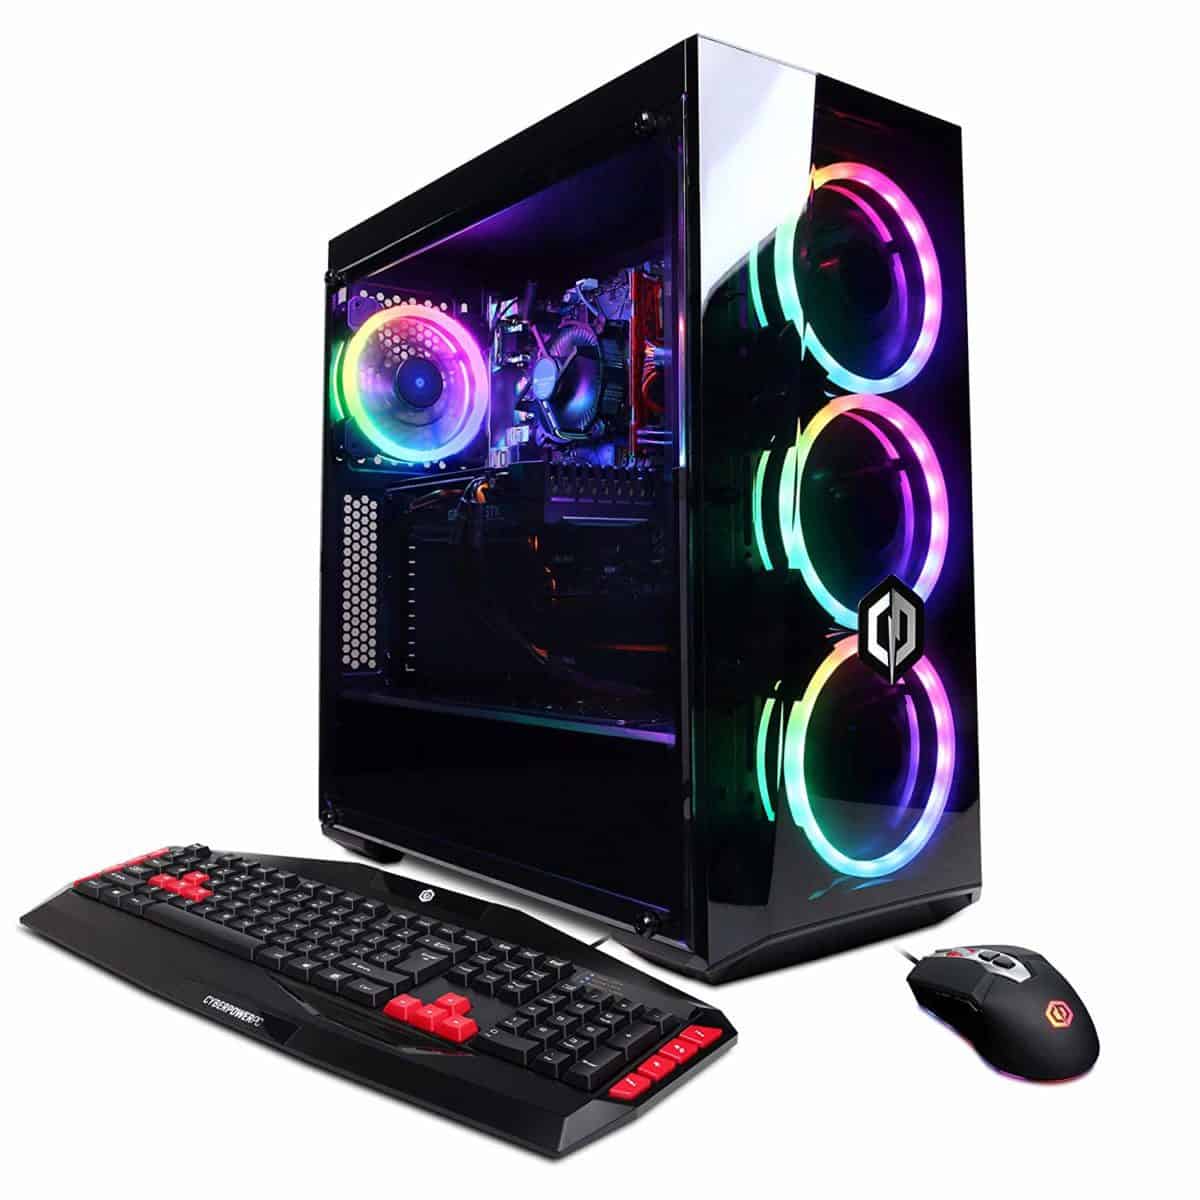 CyberPower Black Friday Gaming PC